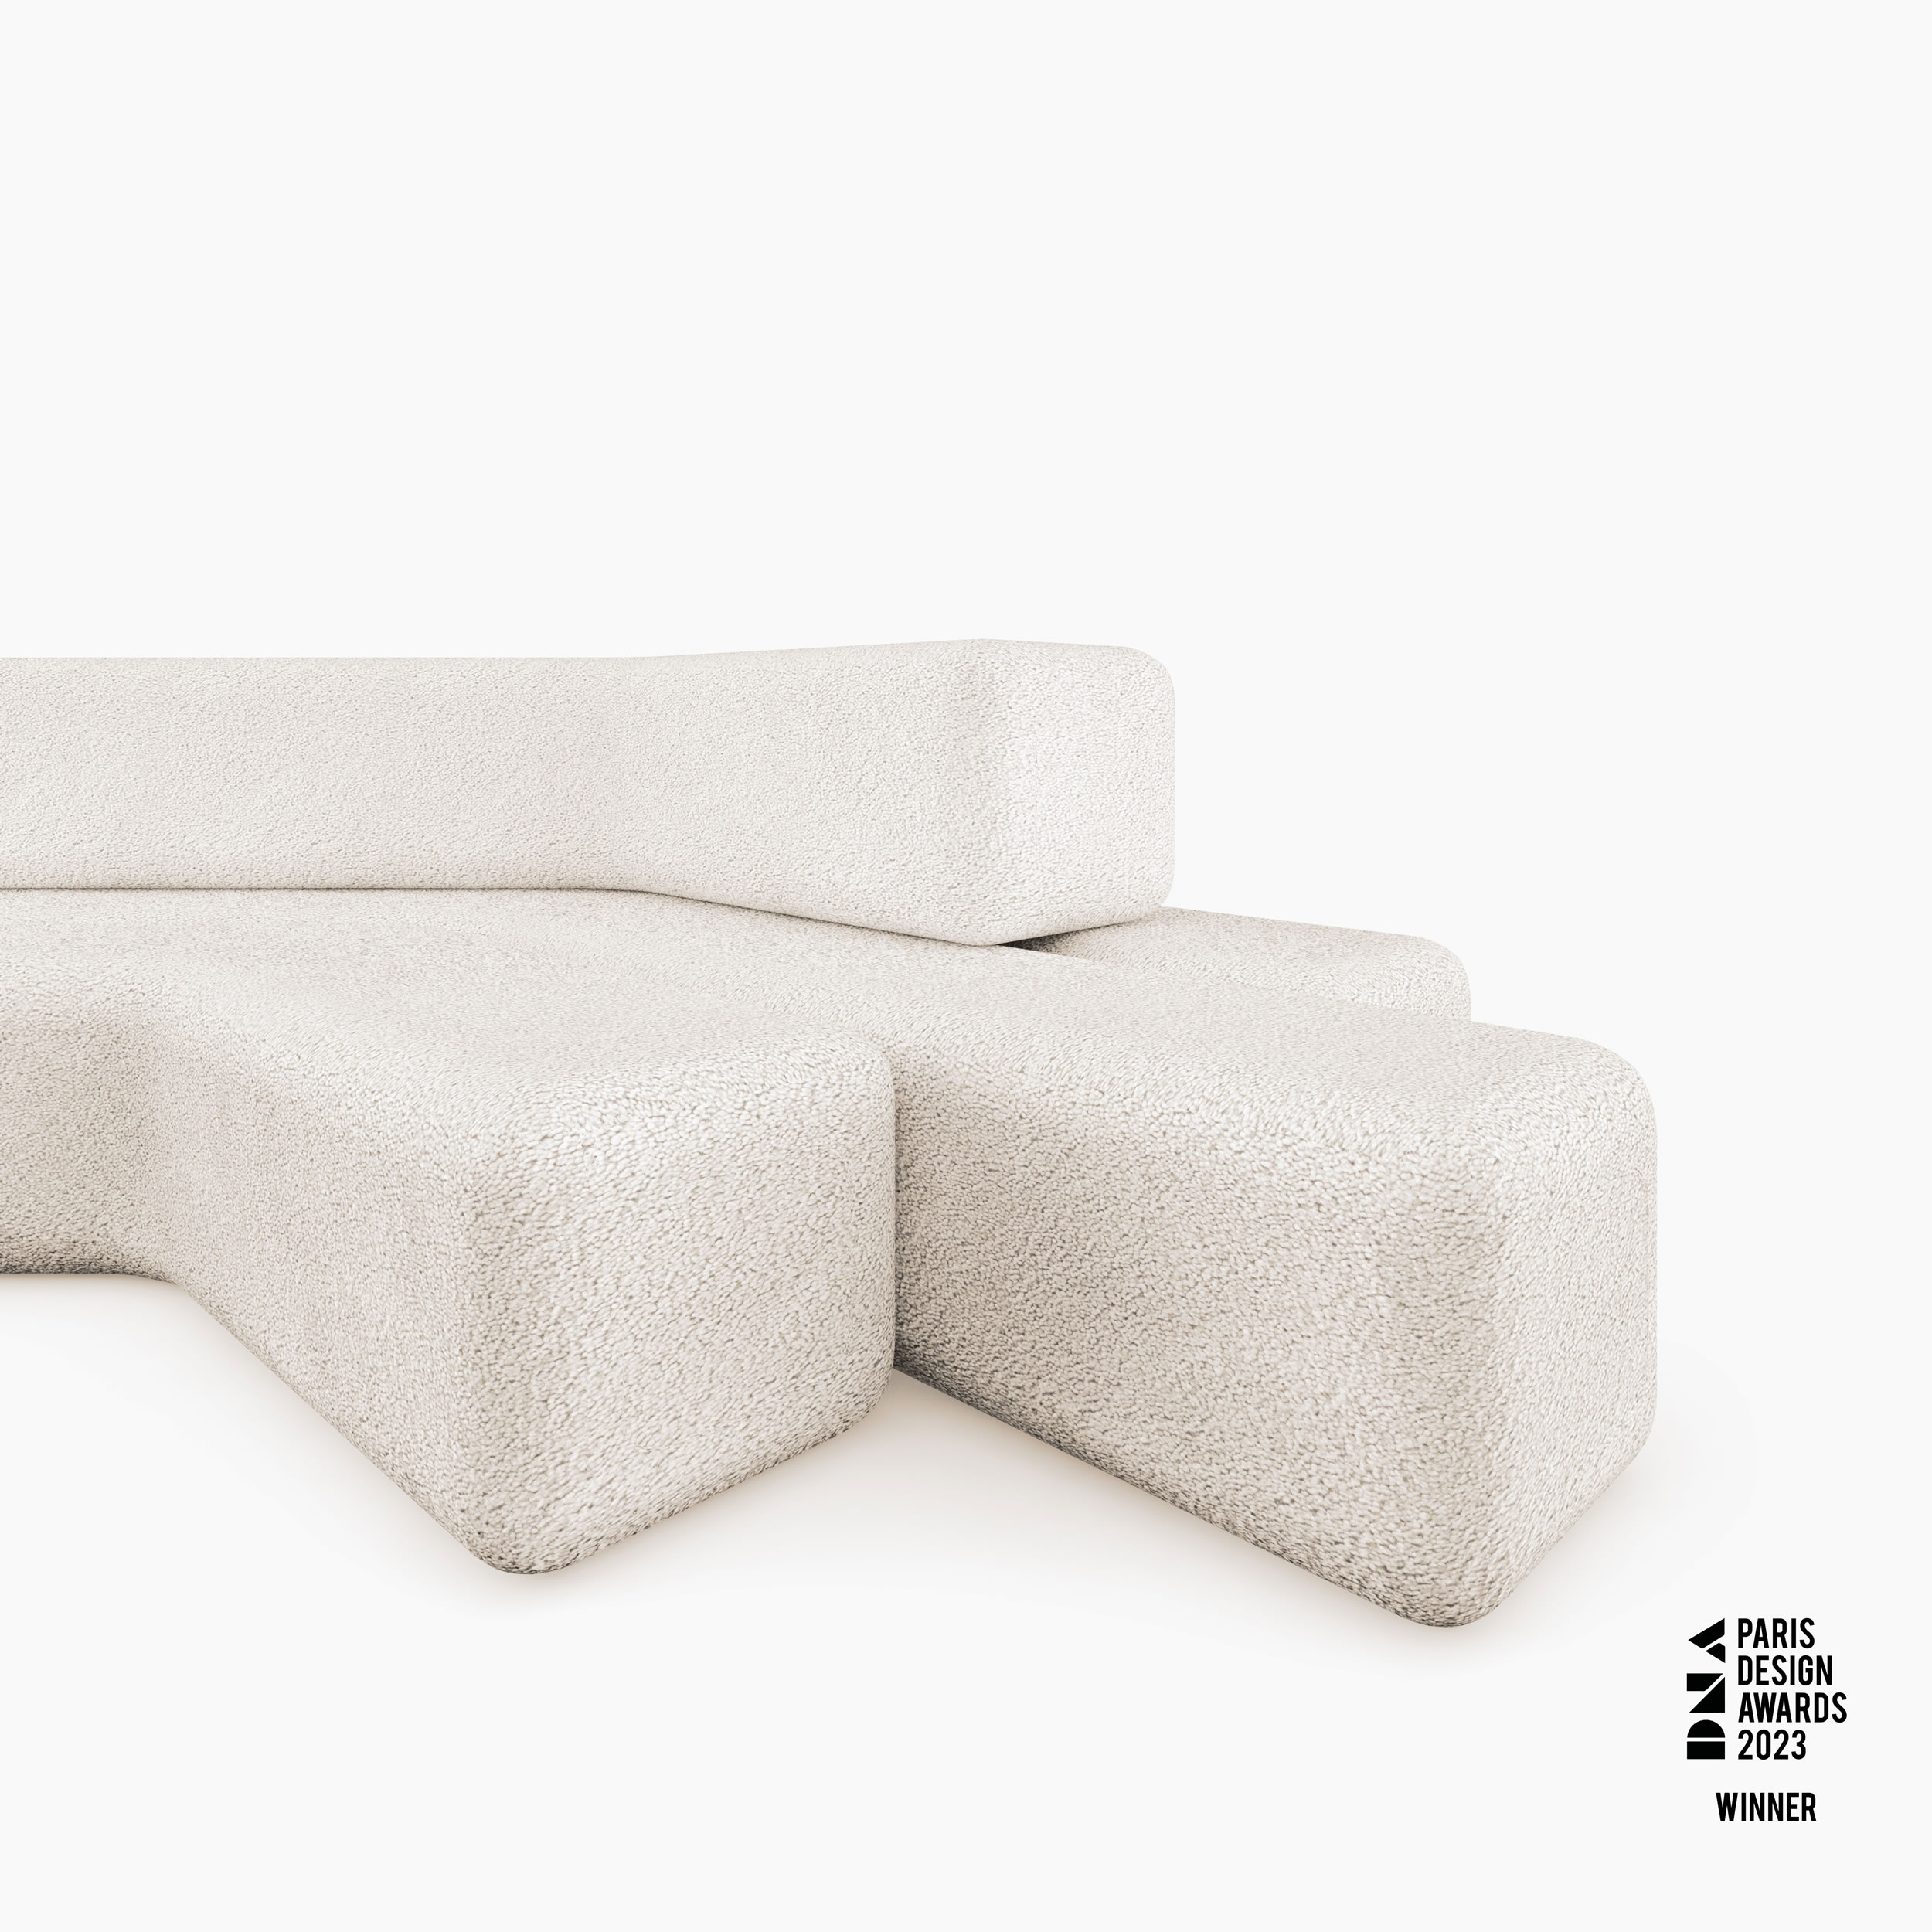 Sofa of long bended square bars Boucle unfathomable simplicity Sitting Room minimalism Sofas FS 413 FELIX SCHWAKE